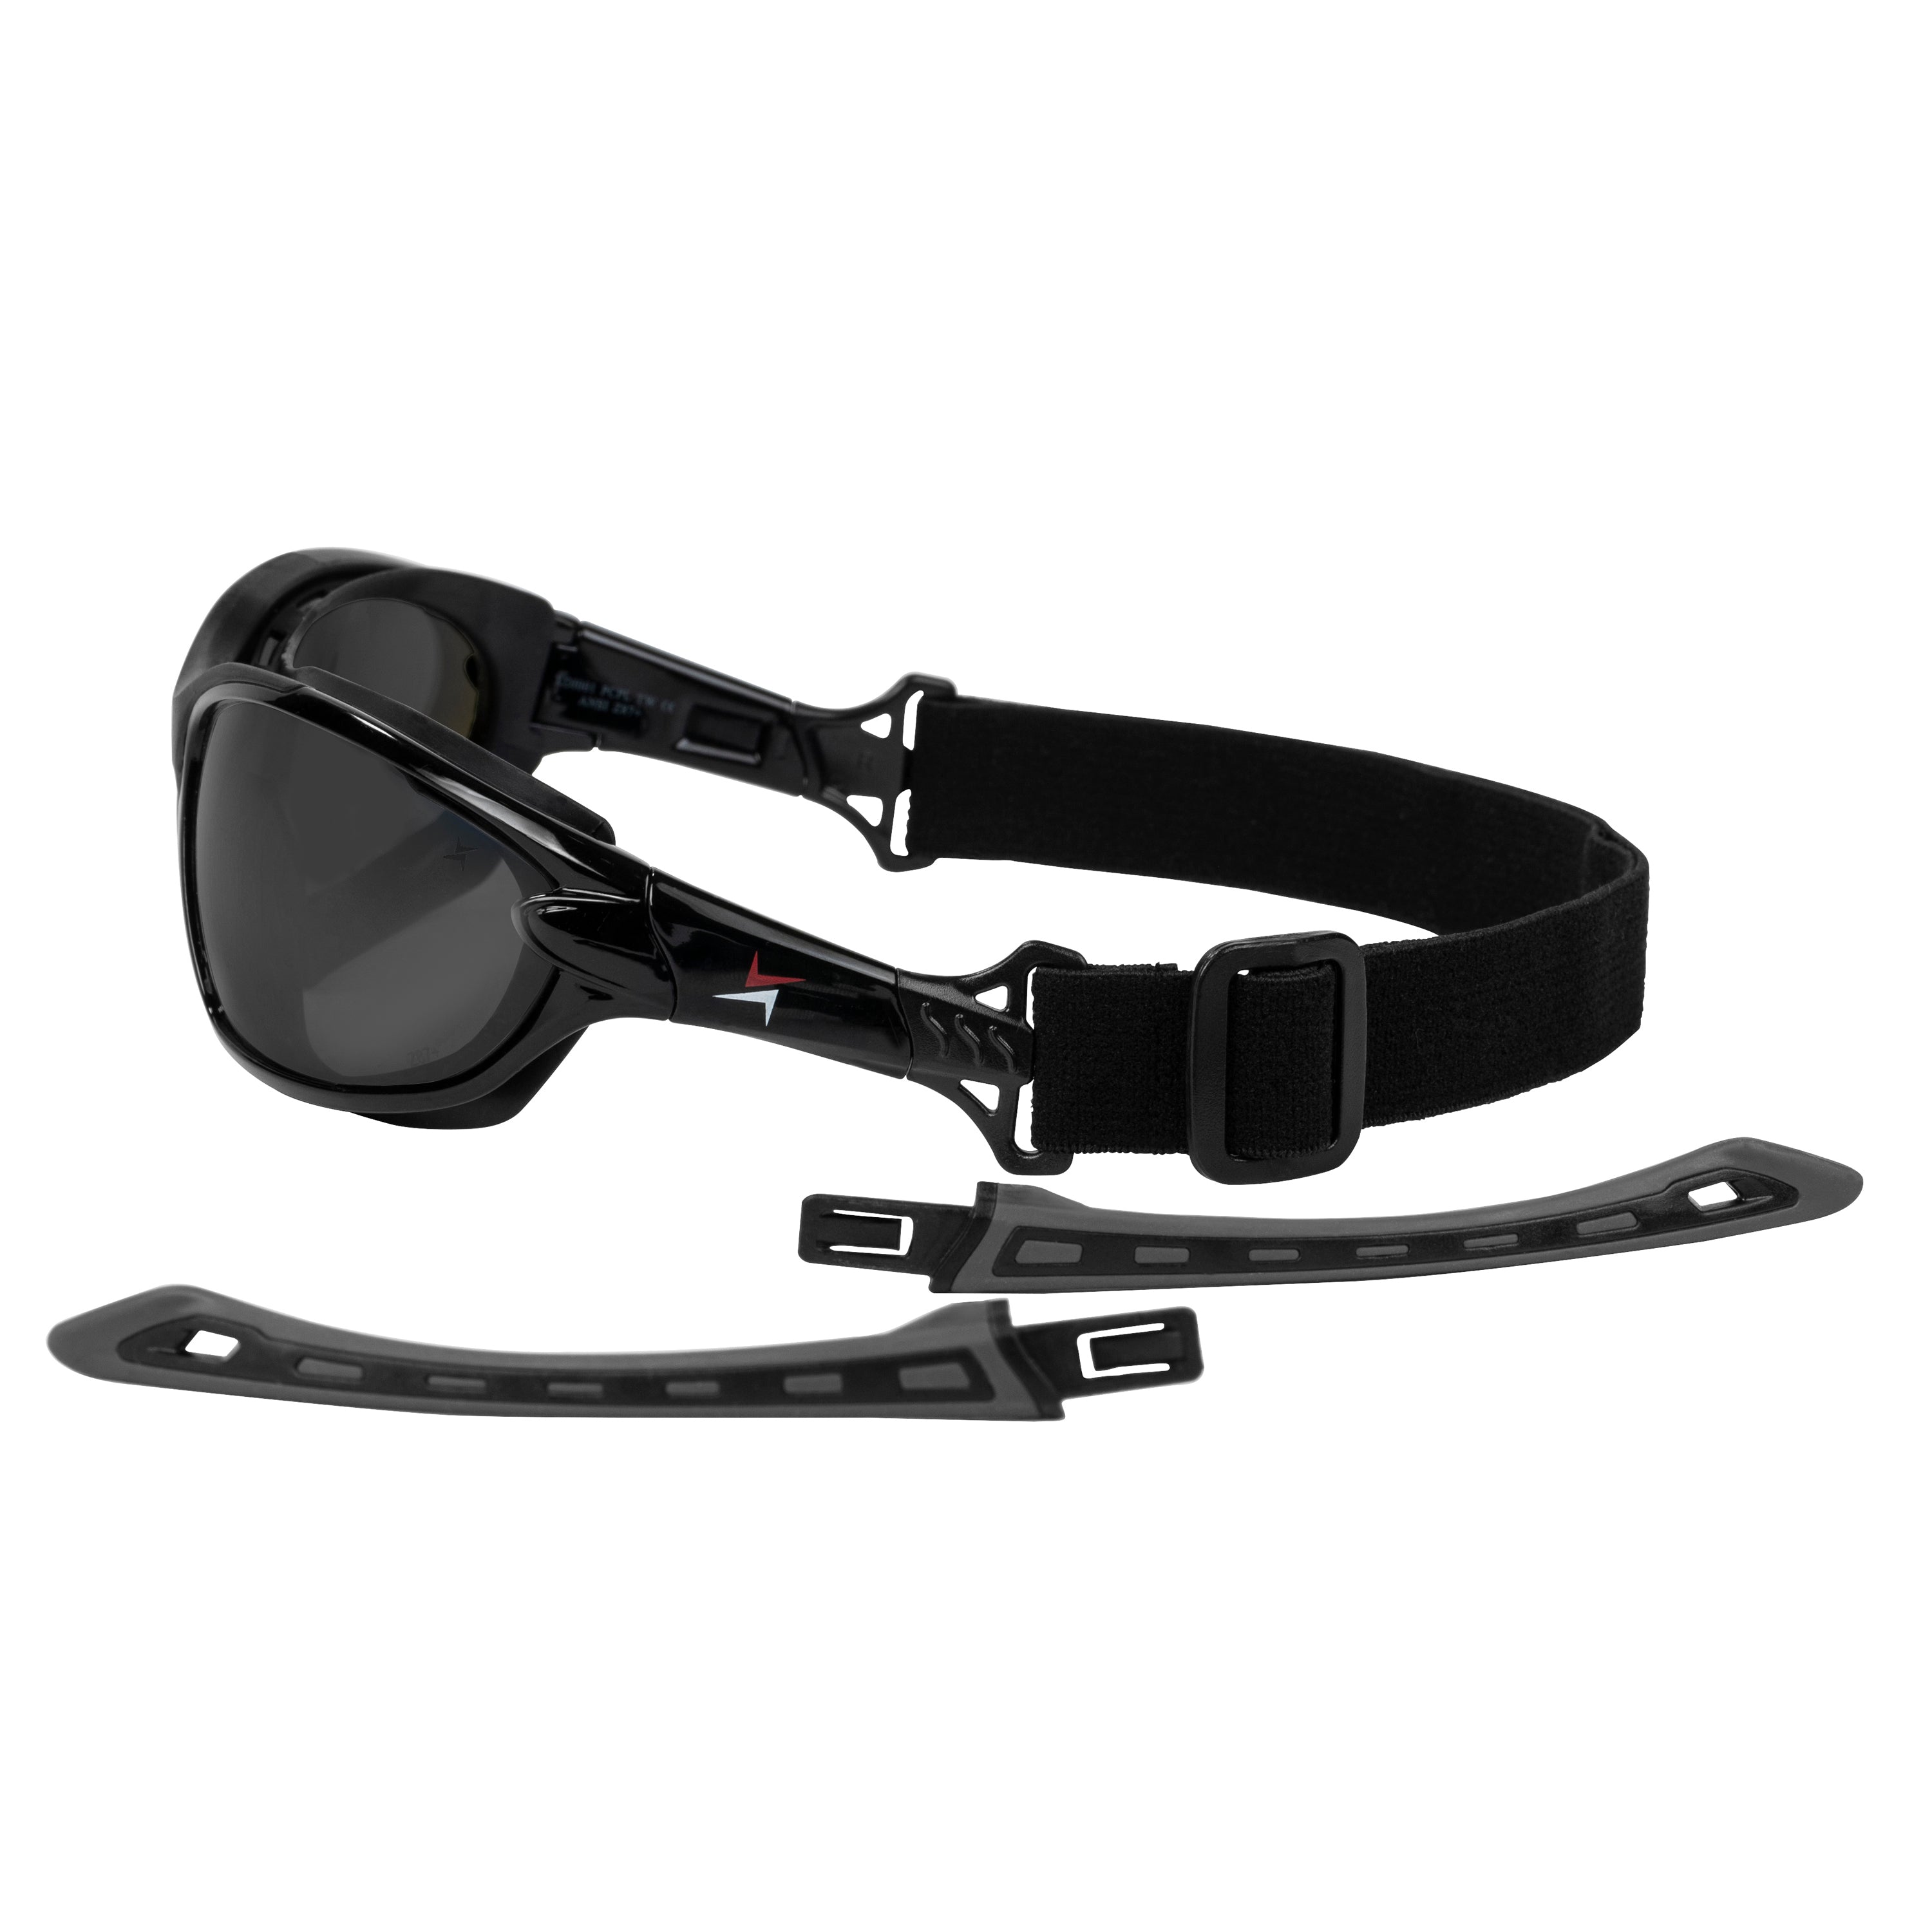 Dark Smoke Lens Sport Safety Sunglasses with Swappable Strap and Gasketed Goggle Padding.